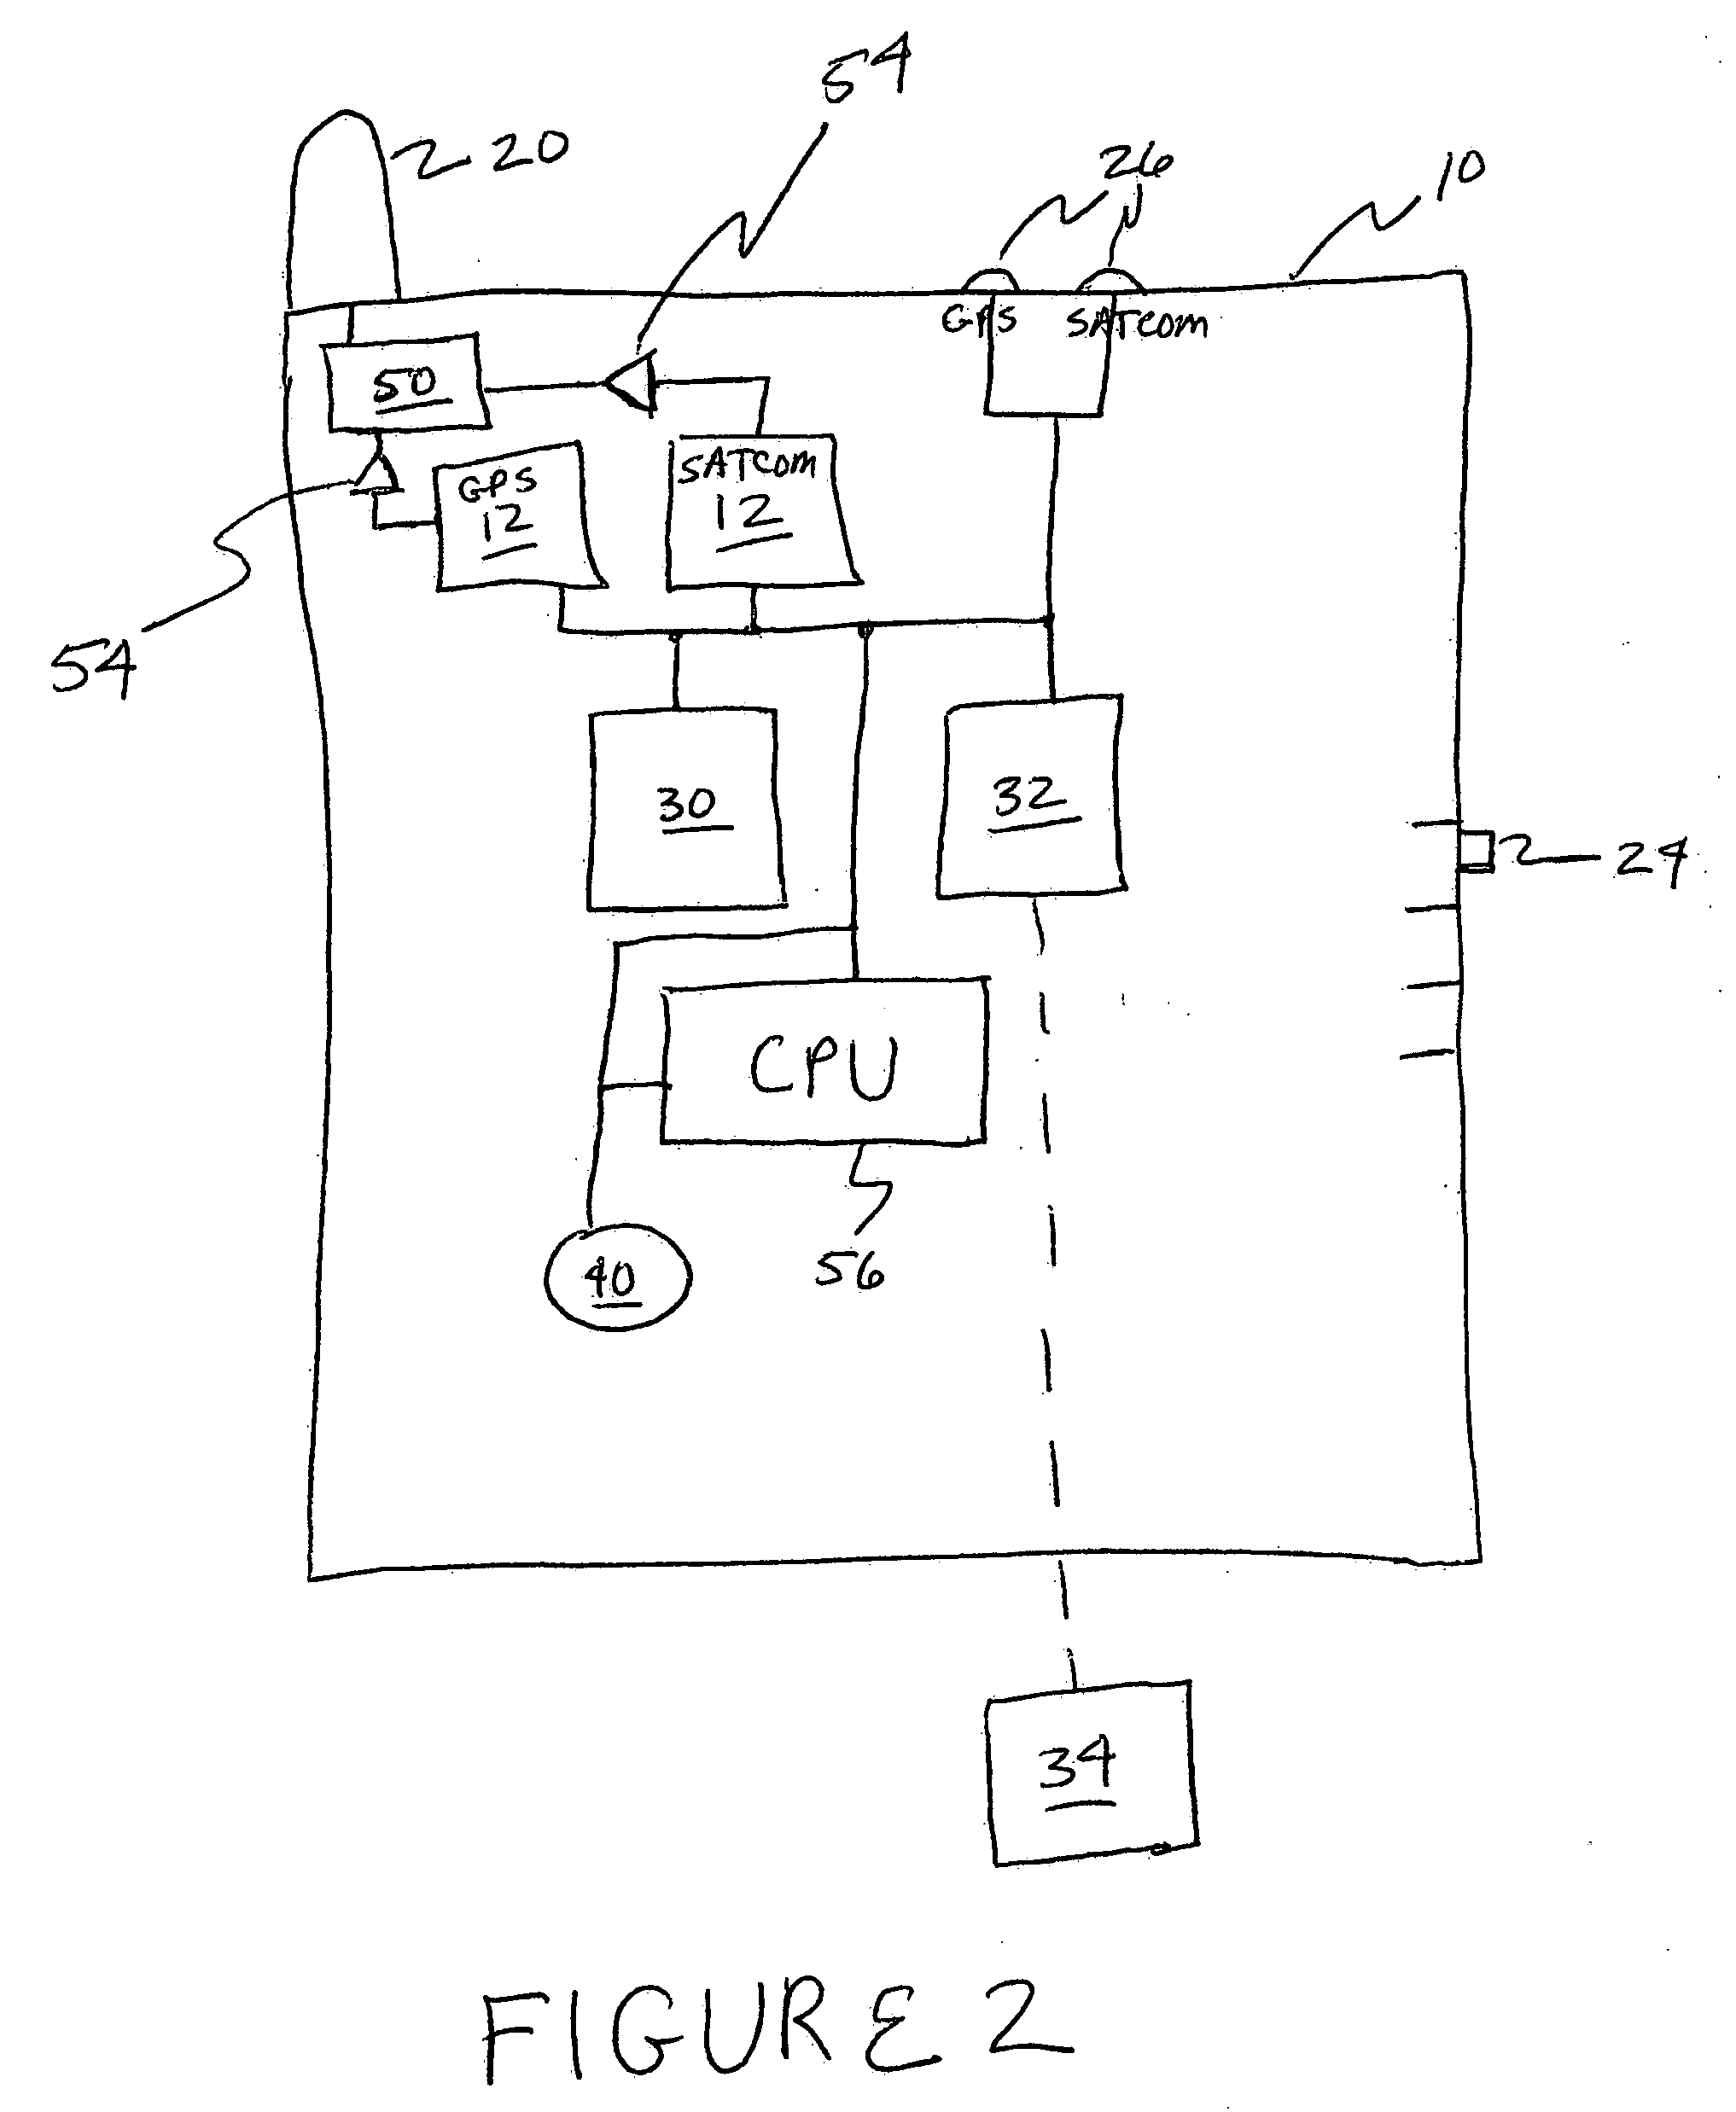 Mobile asset tracking unit, system and method